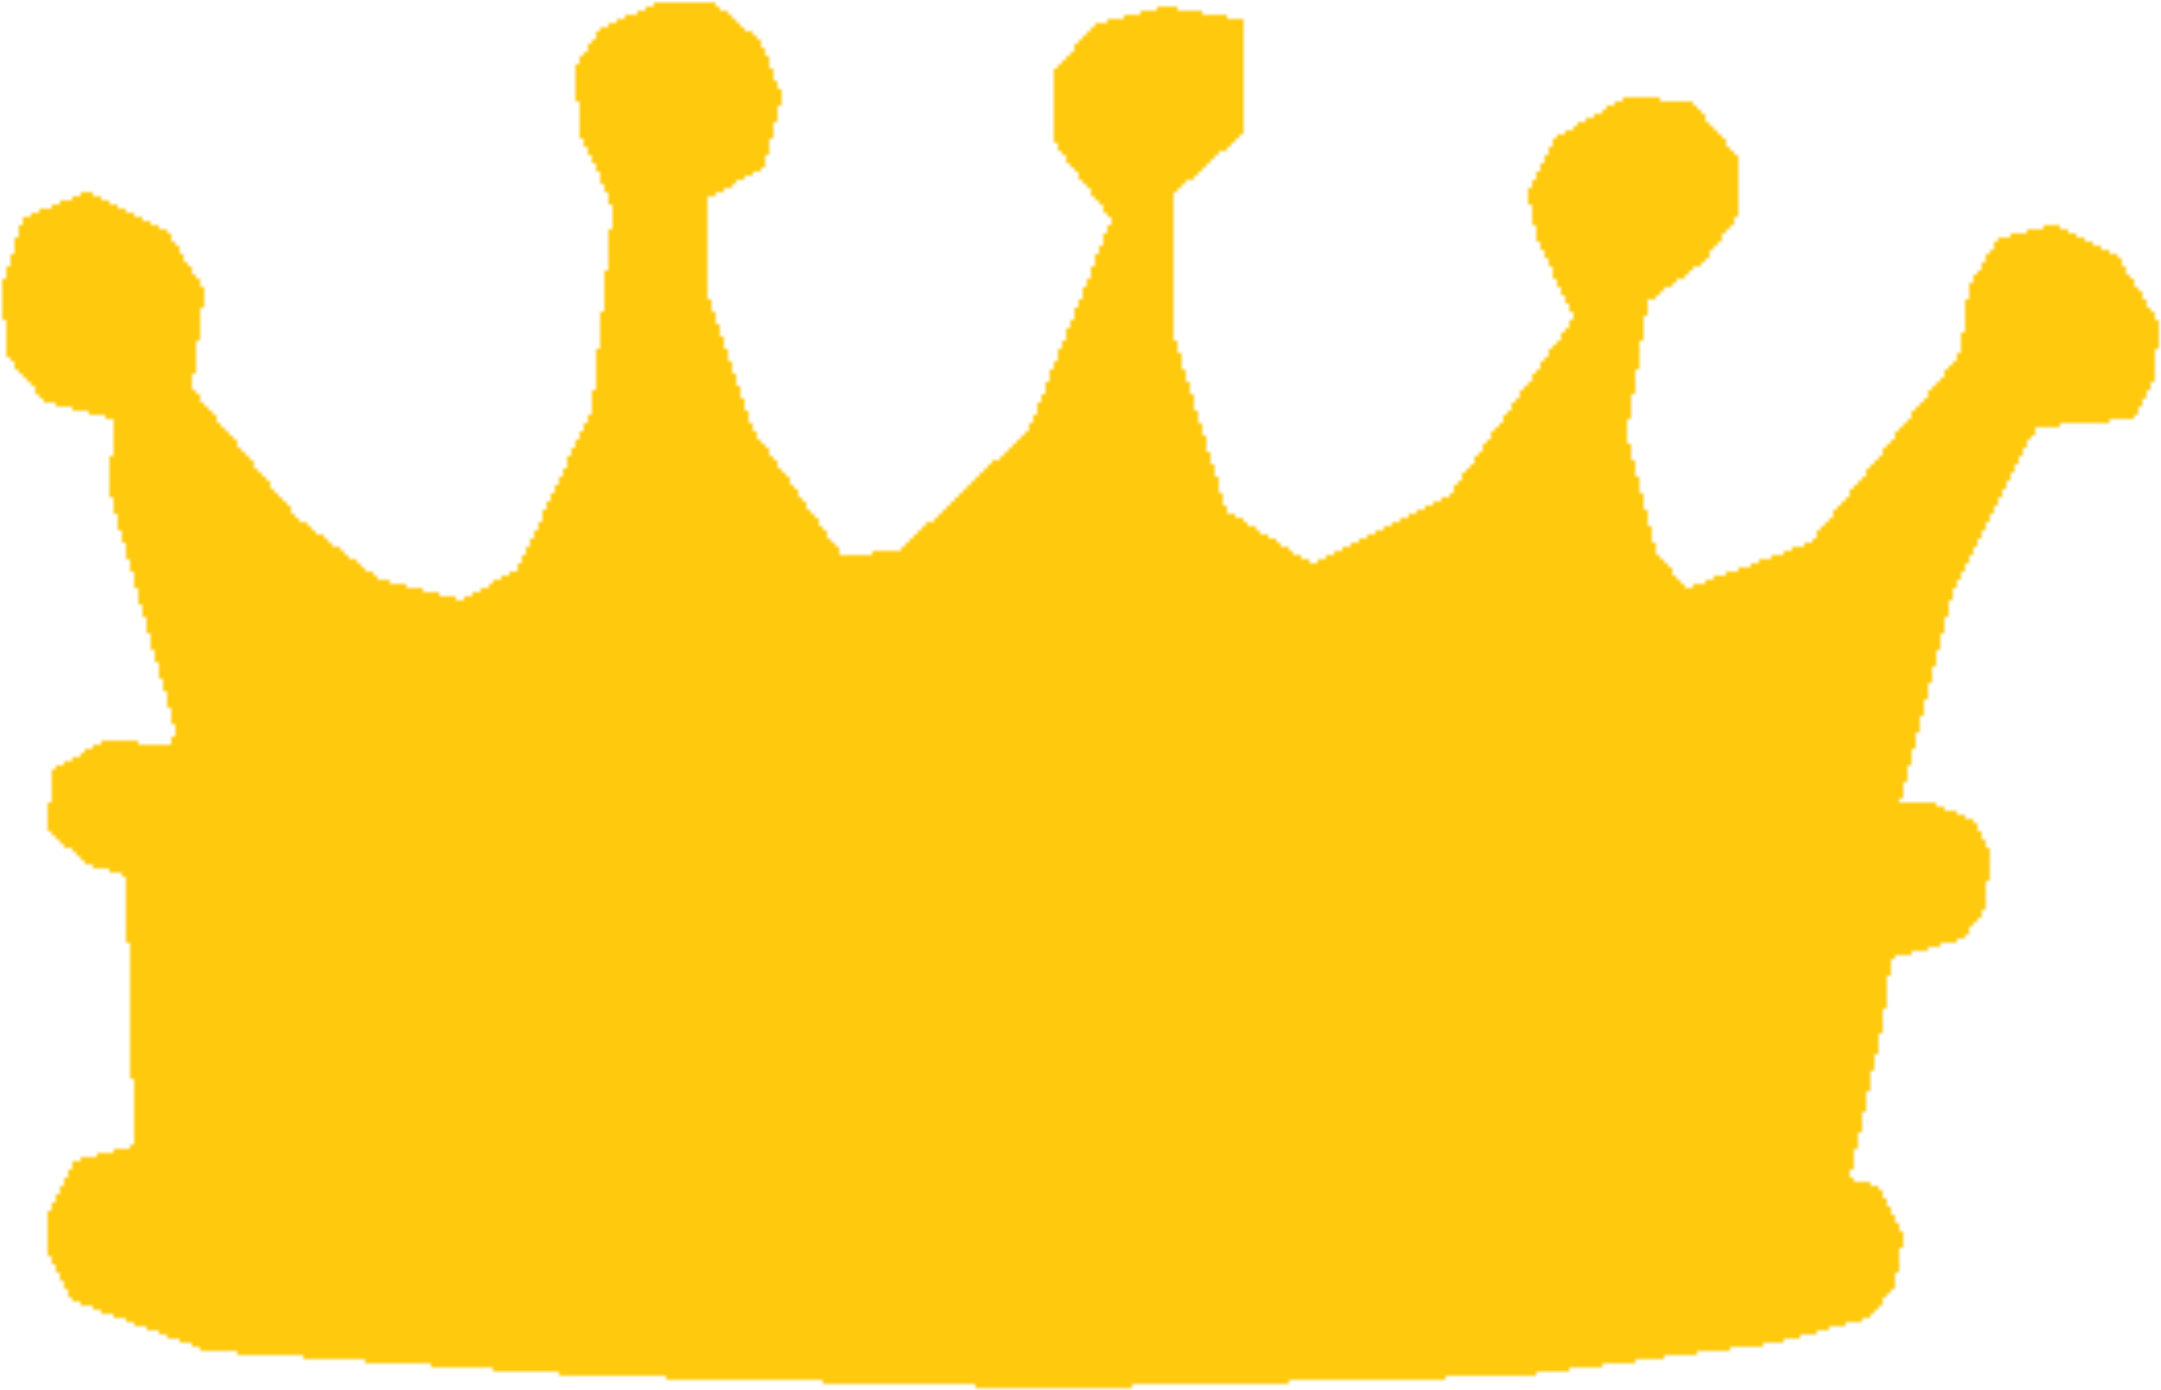 clipart crown fish